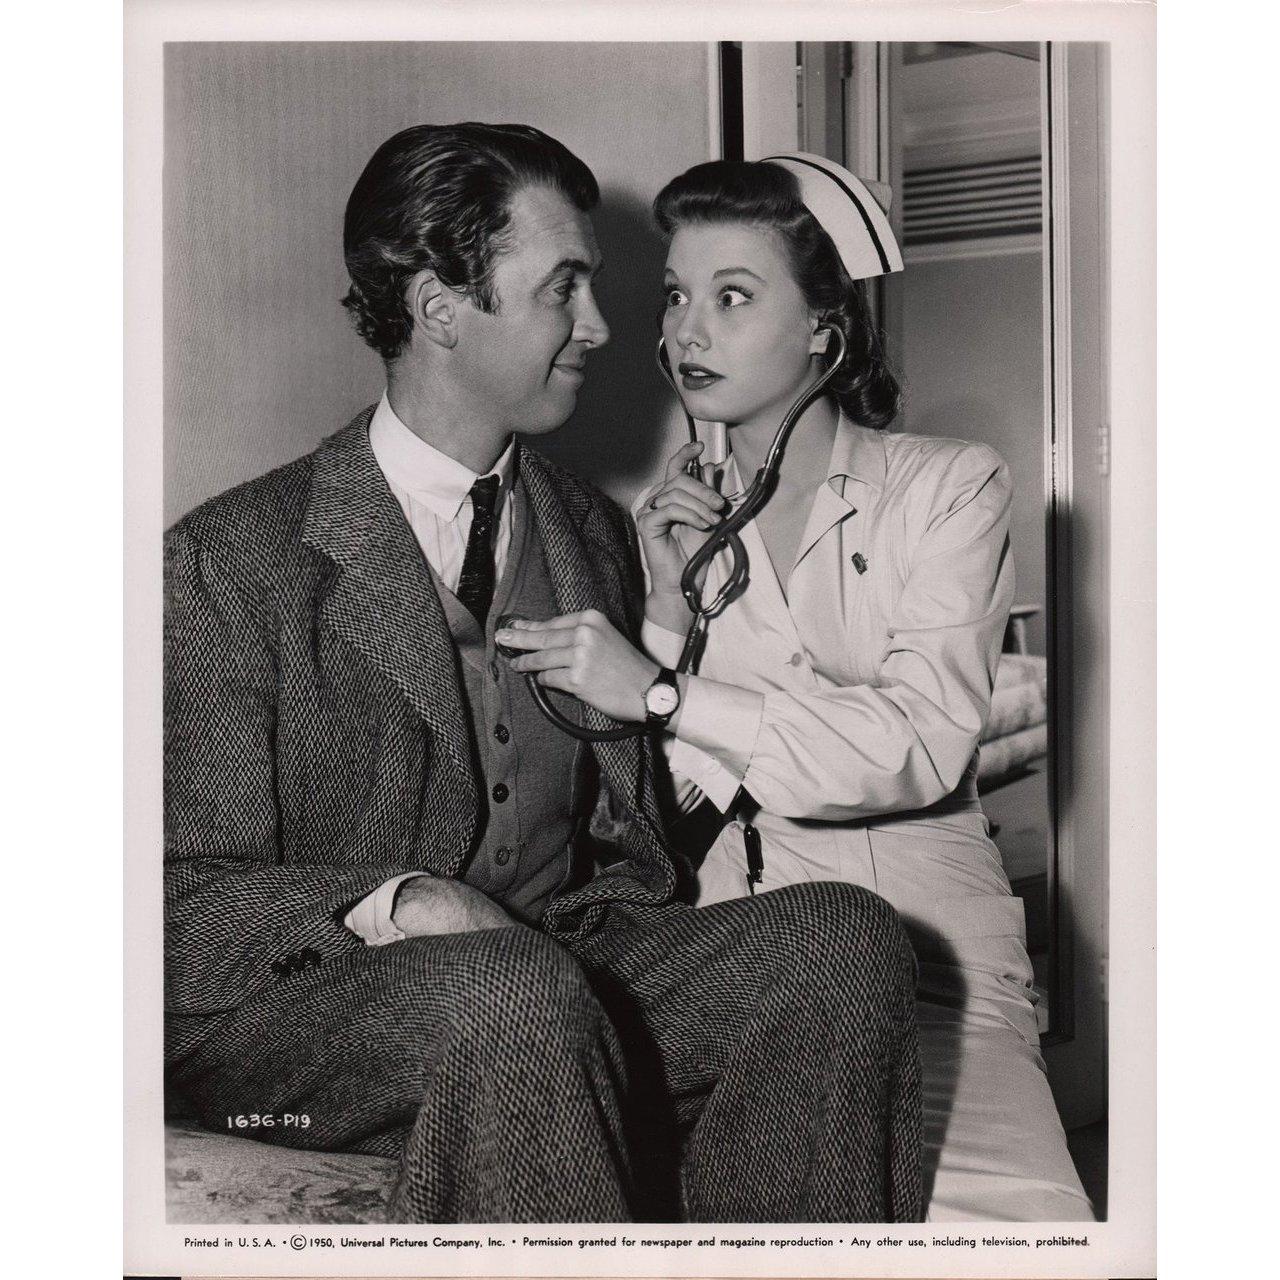 Original 1950 U.S. silver gelatin single-weight photo for the film Harvey directed by Henry Koster with James Stewart / Josephine Hull / Peggy Dow / Charles Drake. Very good-fine condition, folded. Many original posters were issued folded or were